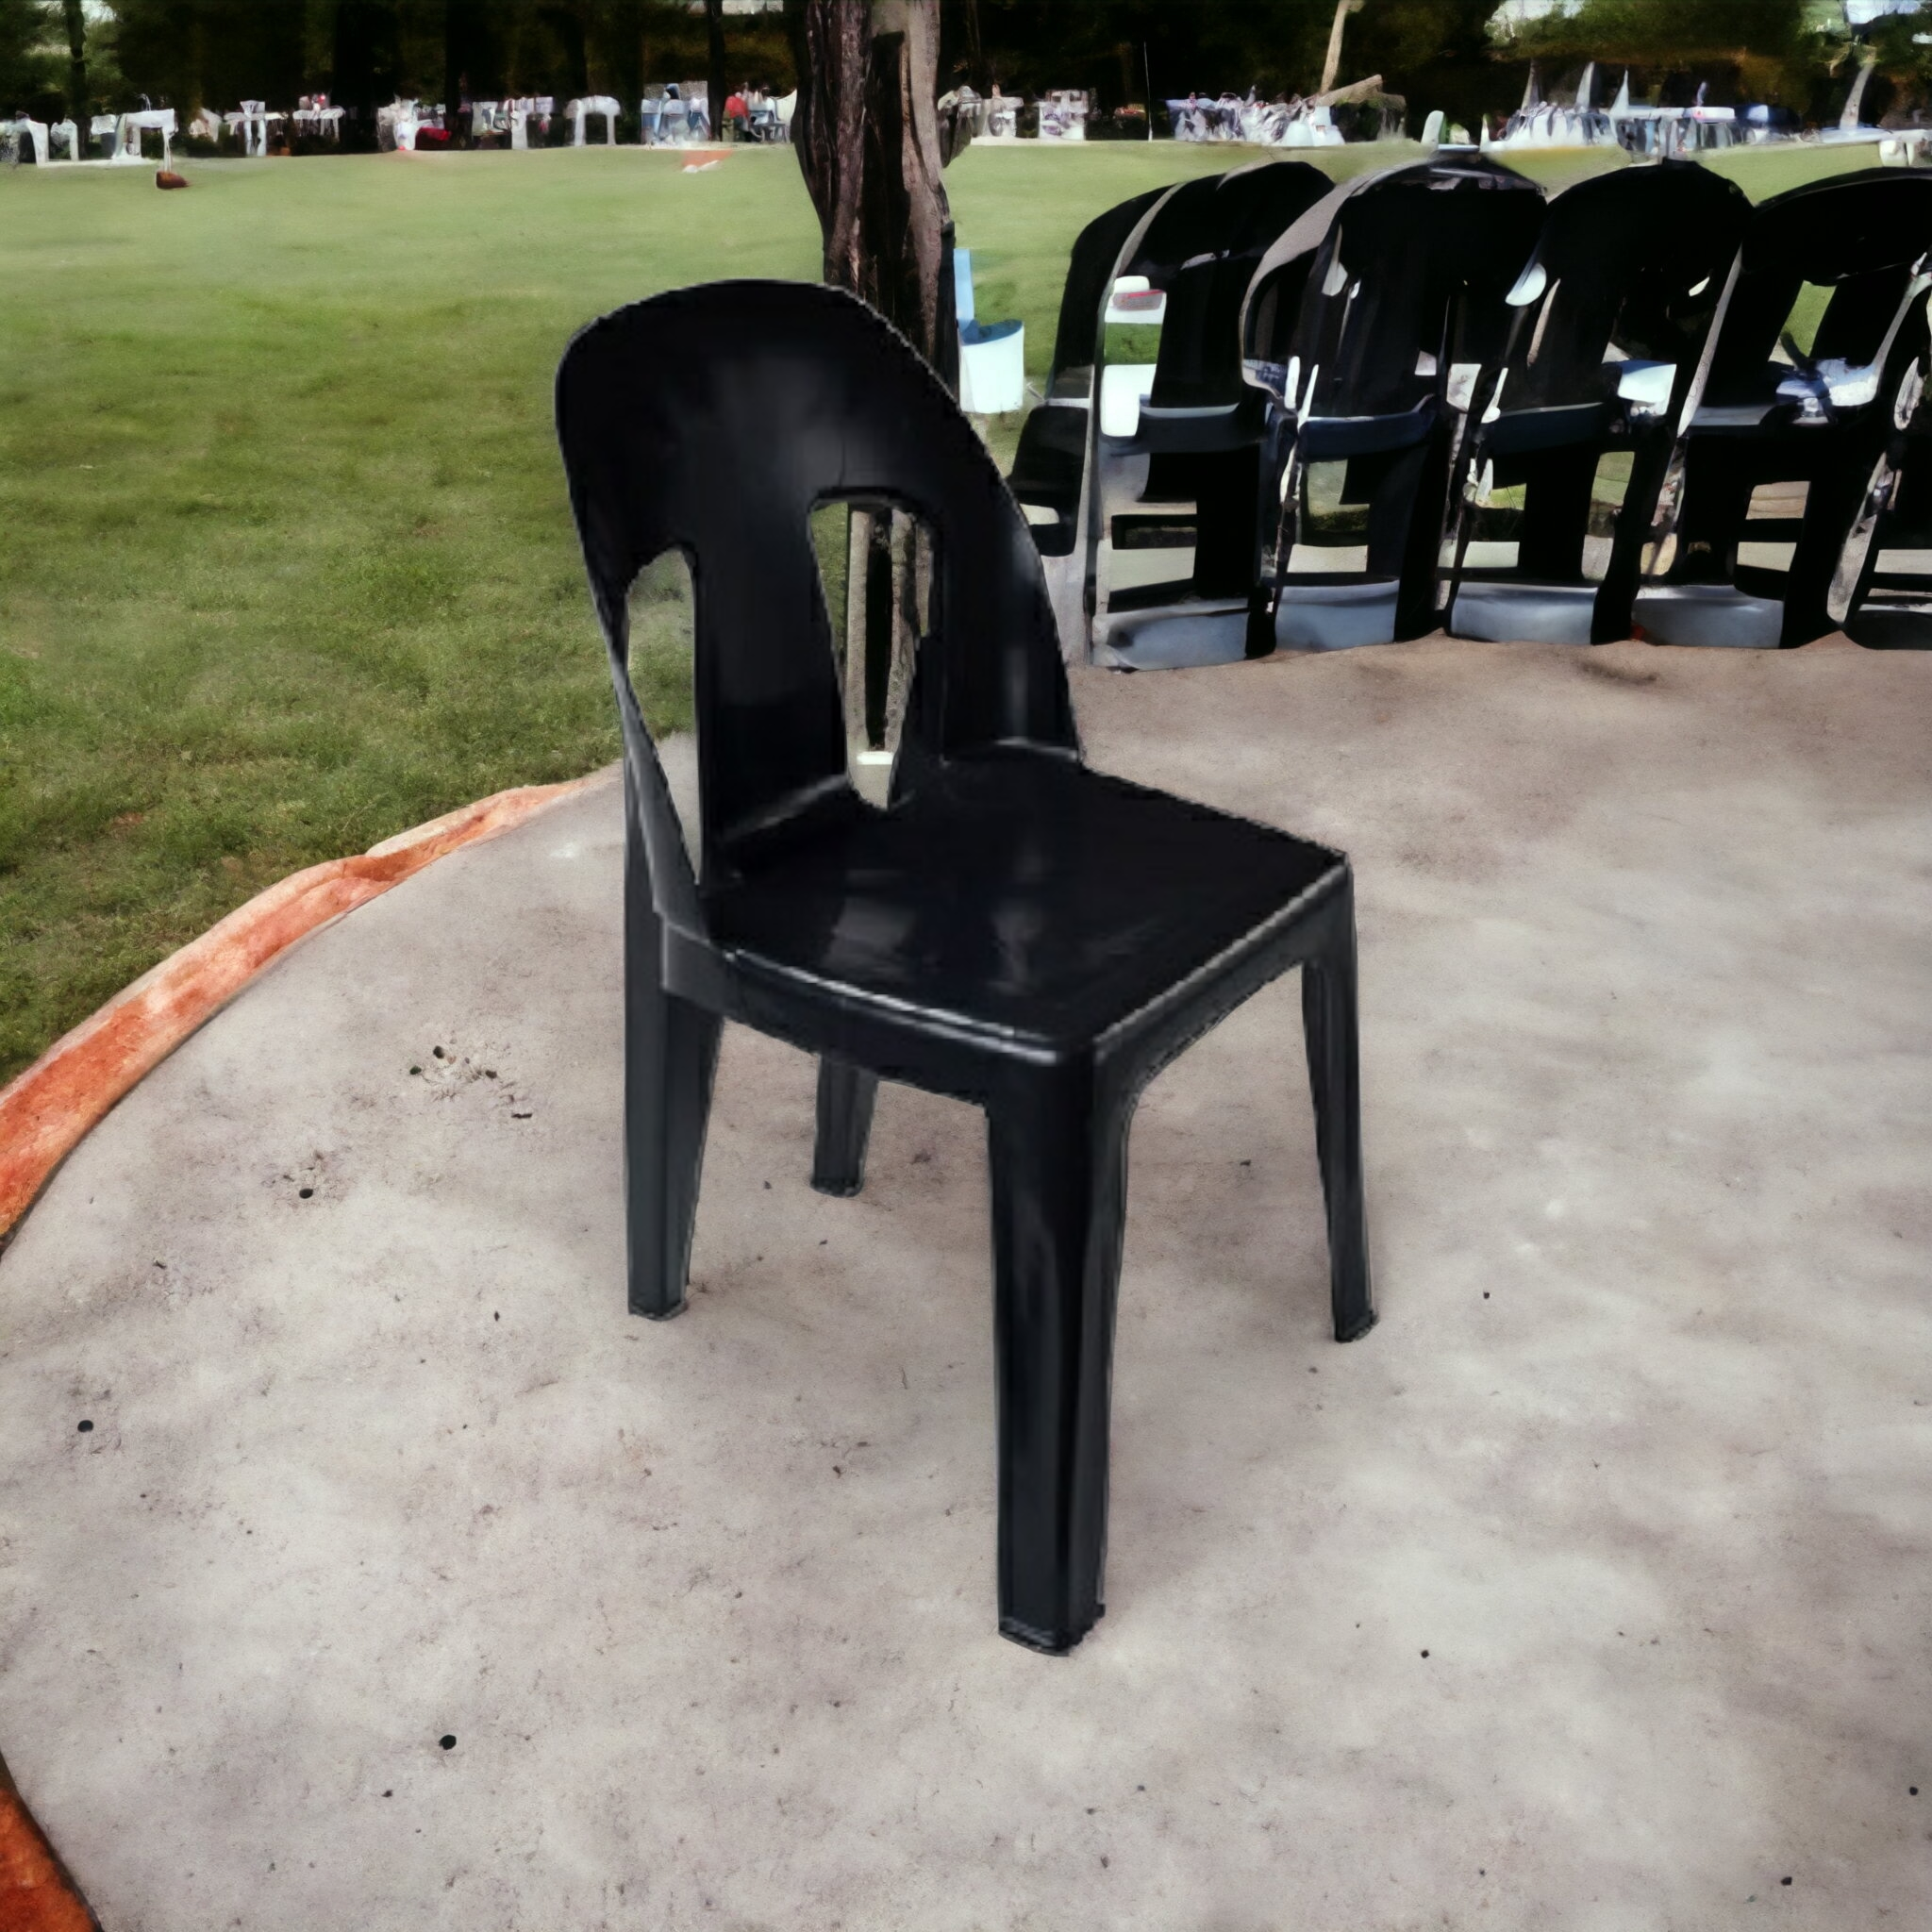 Adult Party Chair Black Contour Outdoor